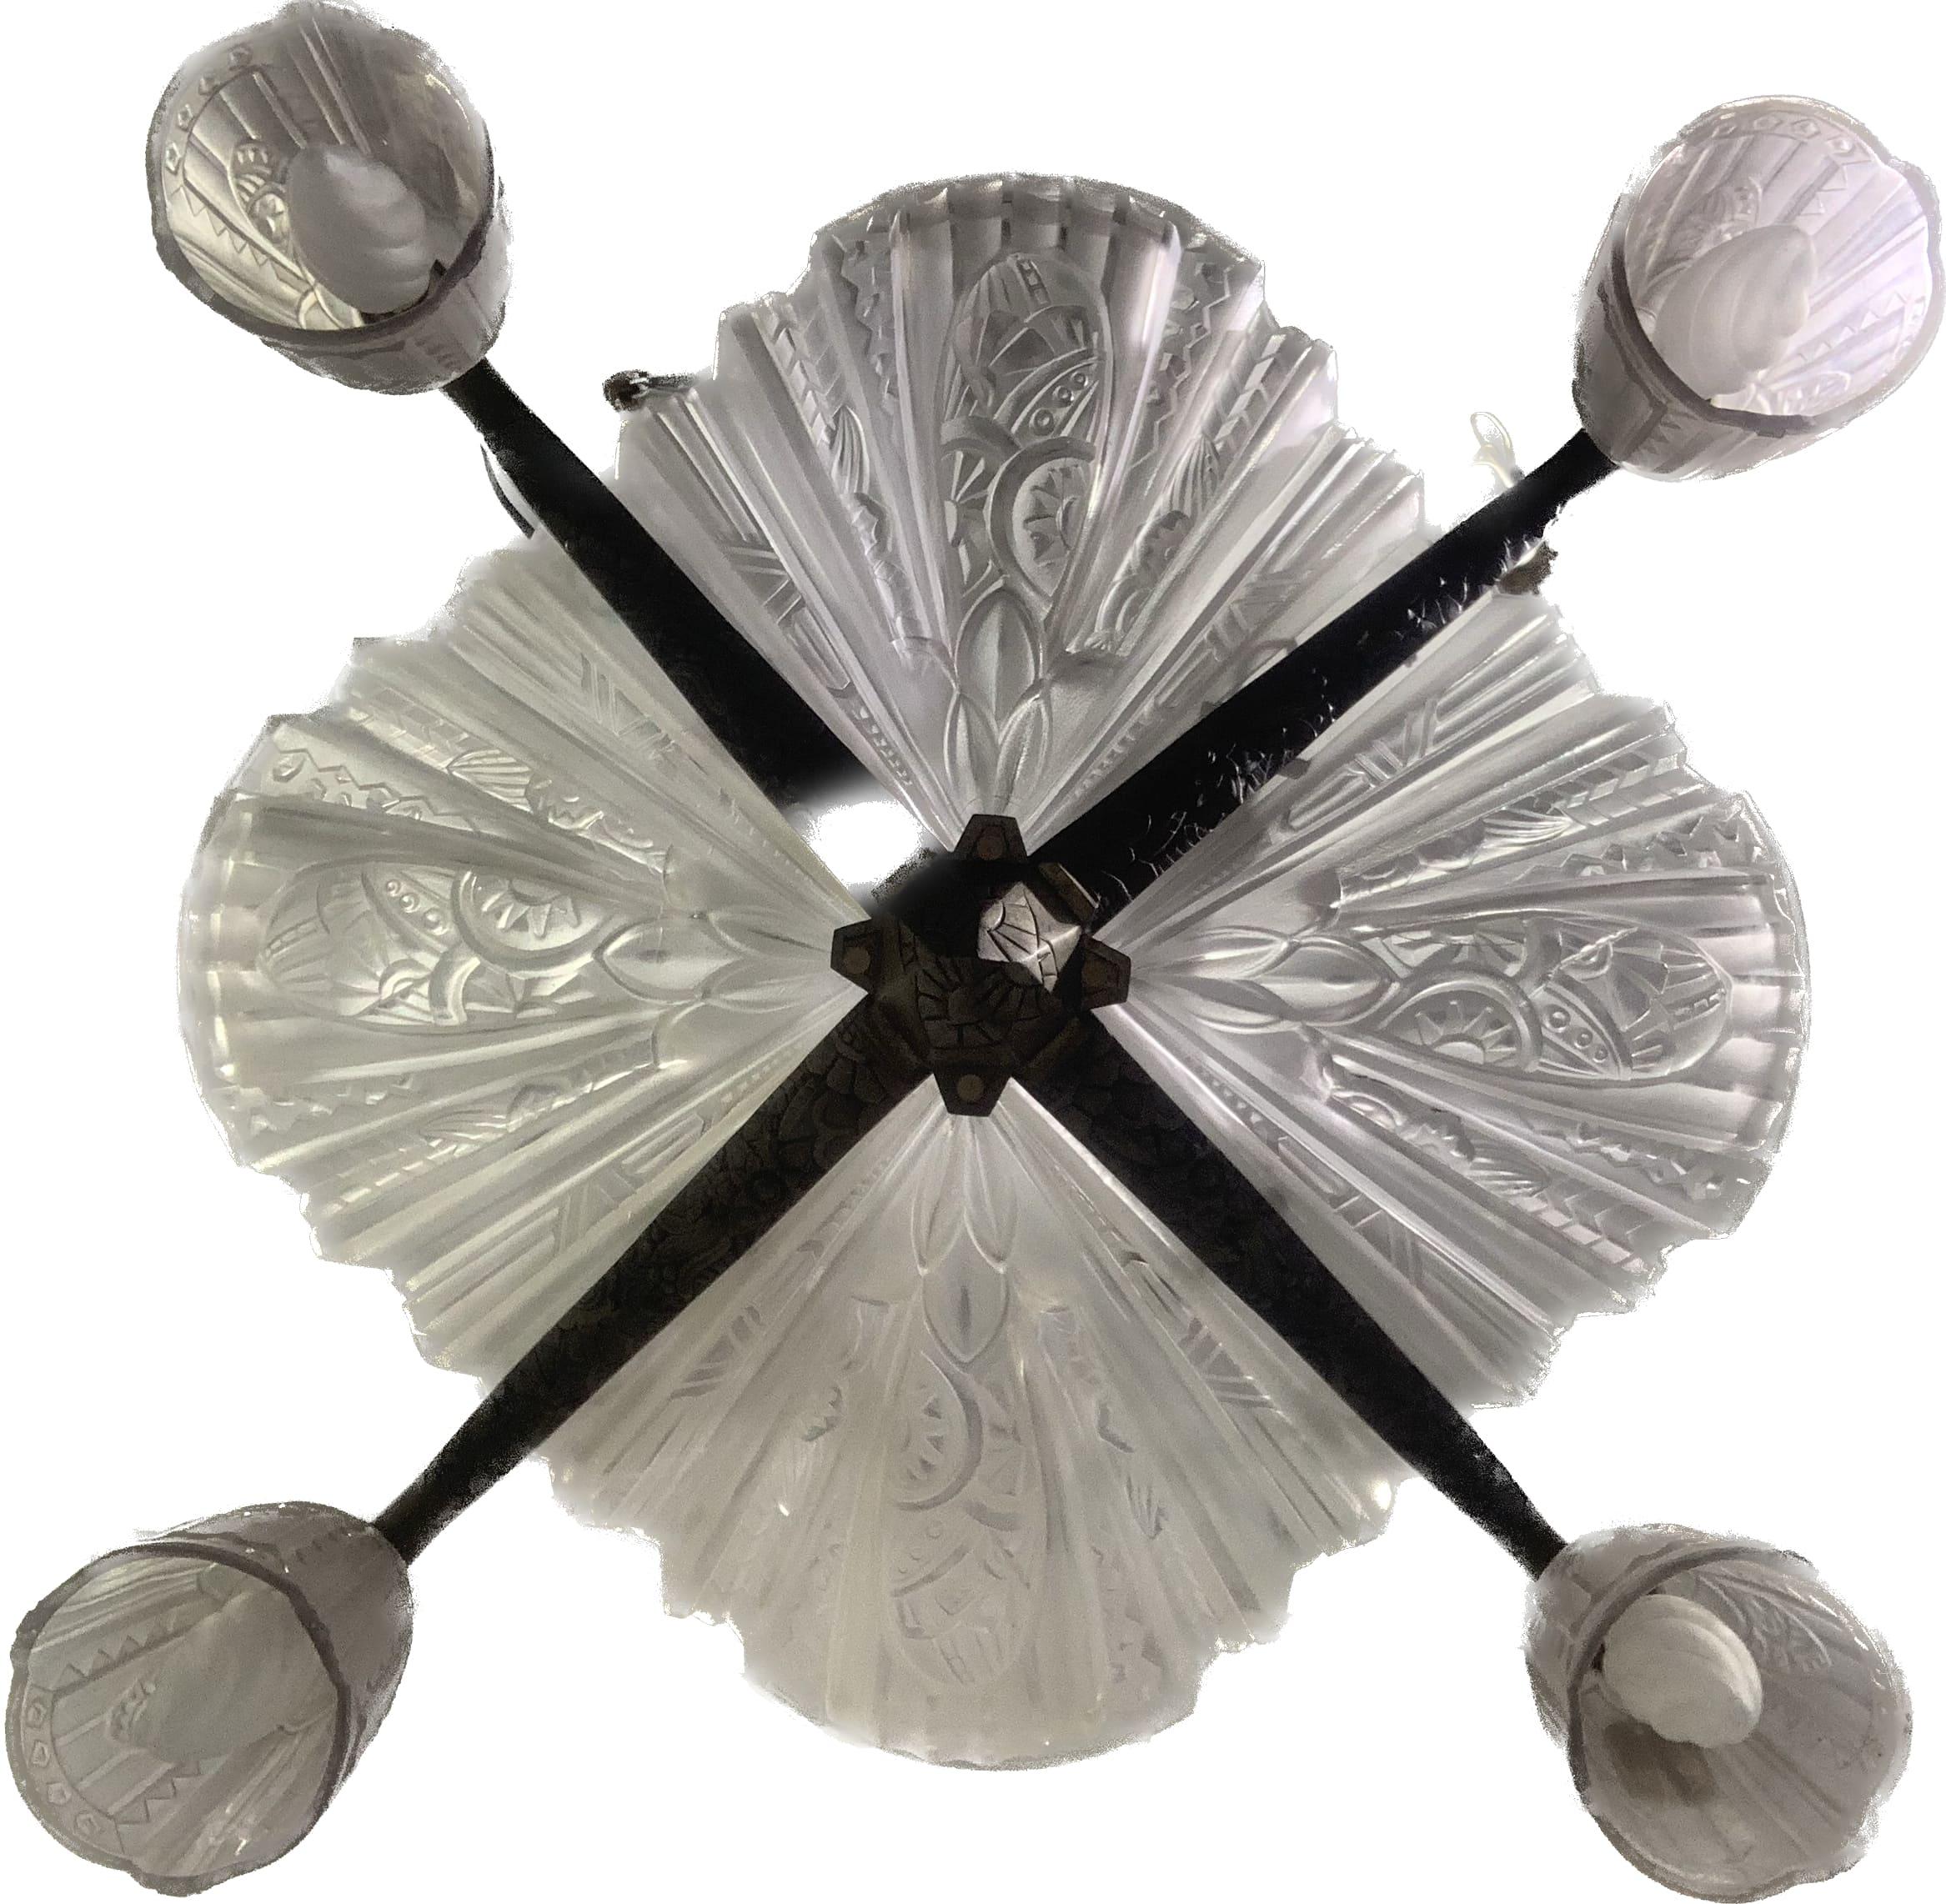 Chandelier from early 20th century (circa 1930) from French origin. The structure in paginated brass is made constituted of four sconces and four tulips representing typical Art Deco geometric shapes inspired by nature and florals. All of them are